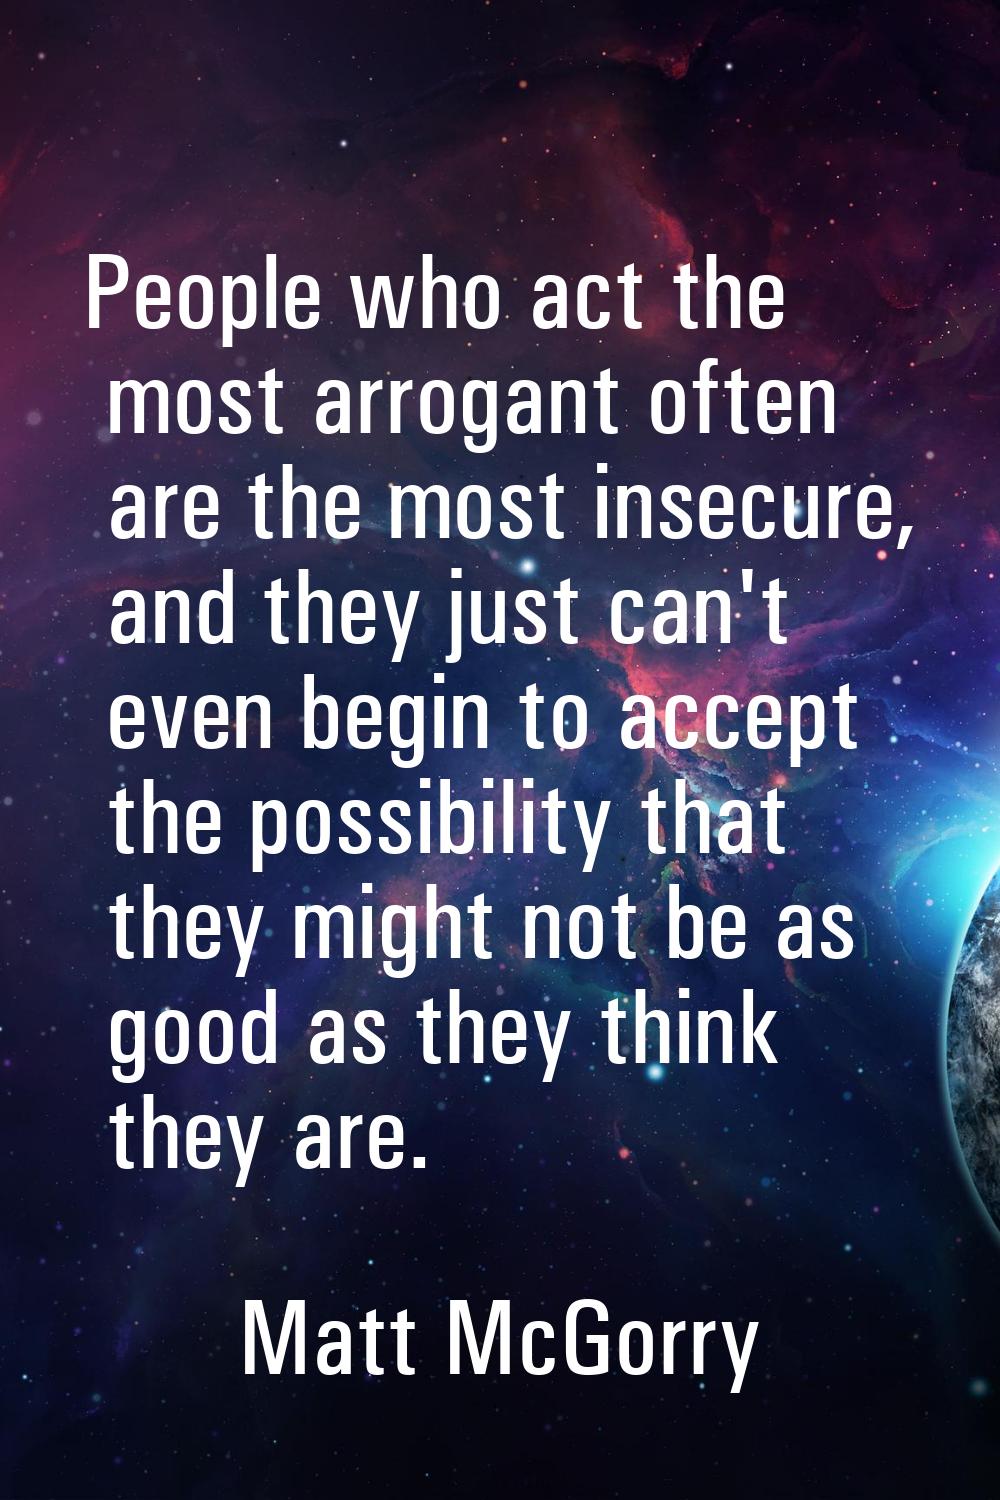 People who act the most arrogant often are the most insecure, and they just can't even begin to acc